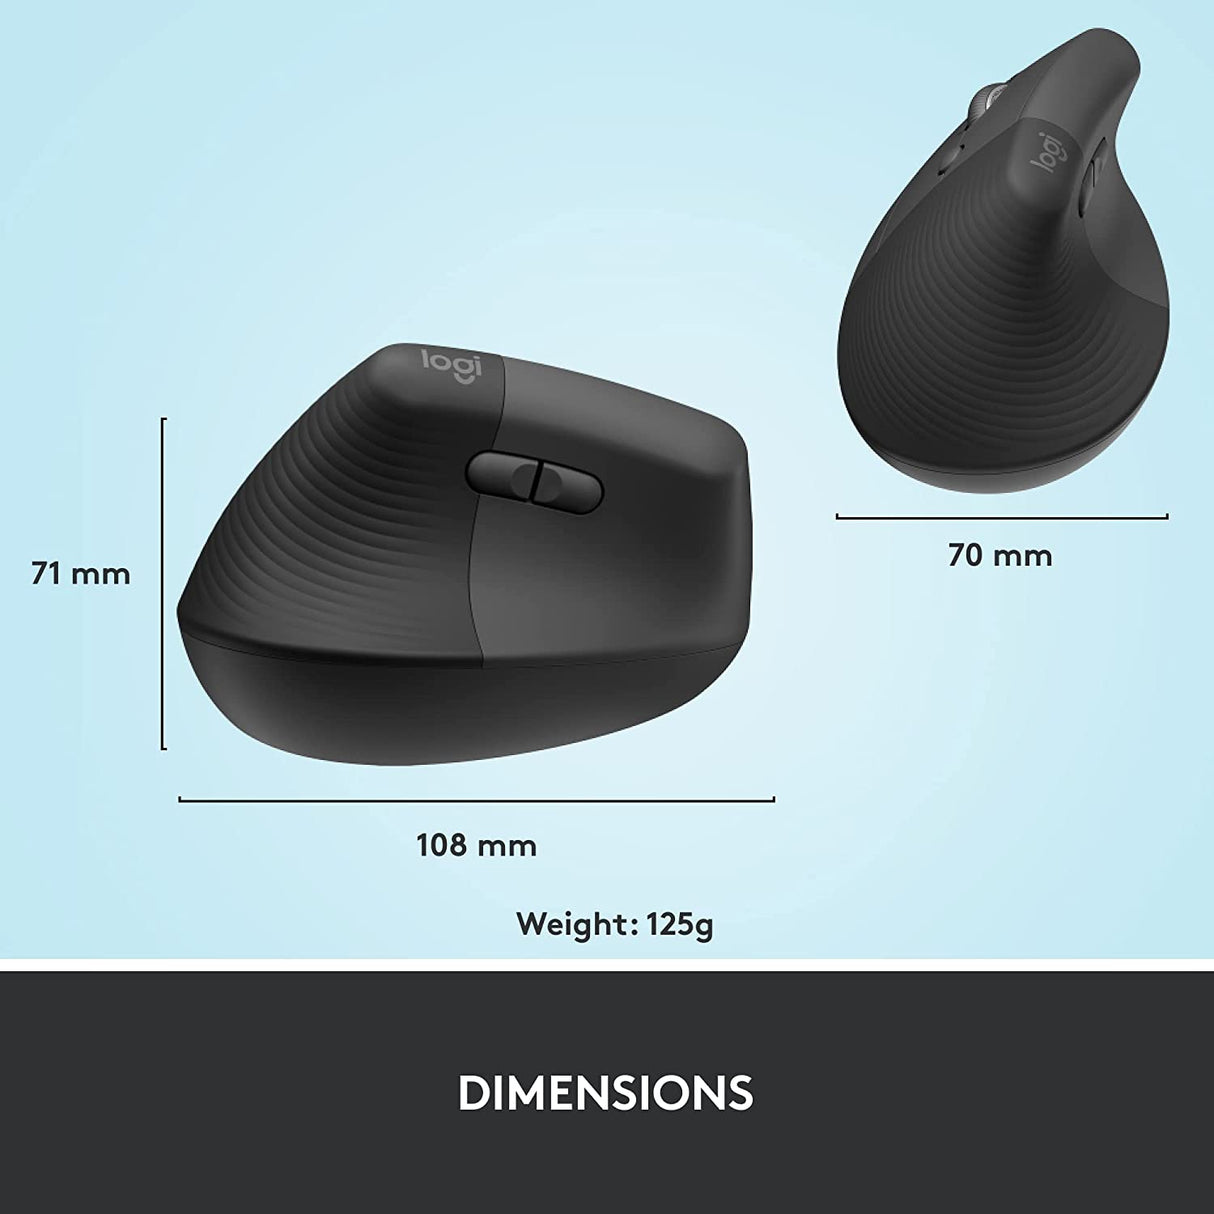 Logitech Lift Vertical Ergonomic Mouse, hands on: Compact and